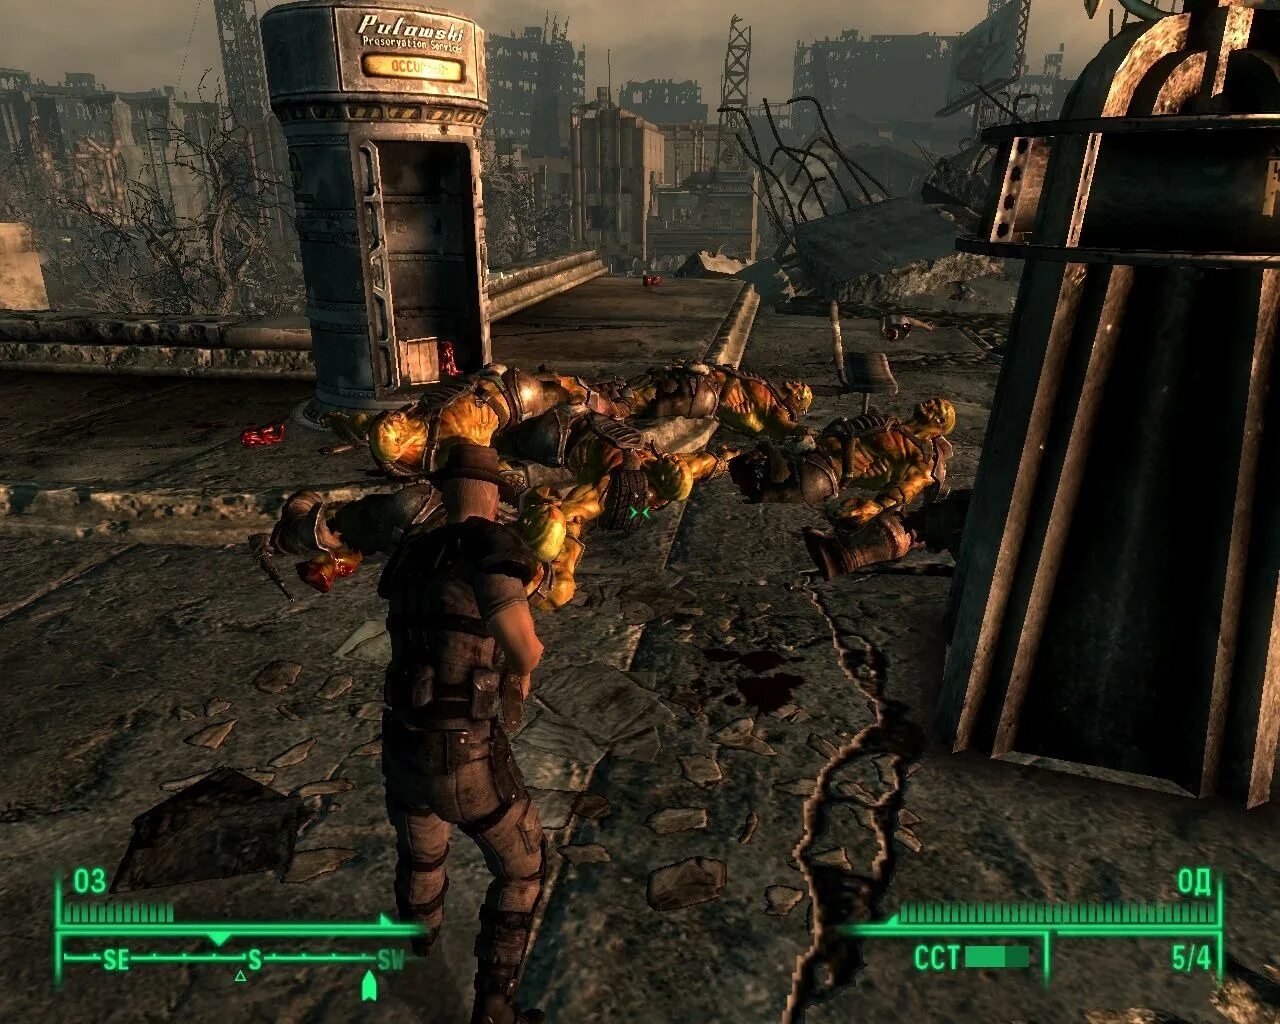 Игра фоллаут. Фоллаут 3. Bethesda Softworks Fallout 3. Fallout 3 Bethesda game Studios.